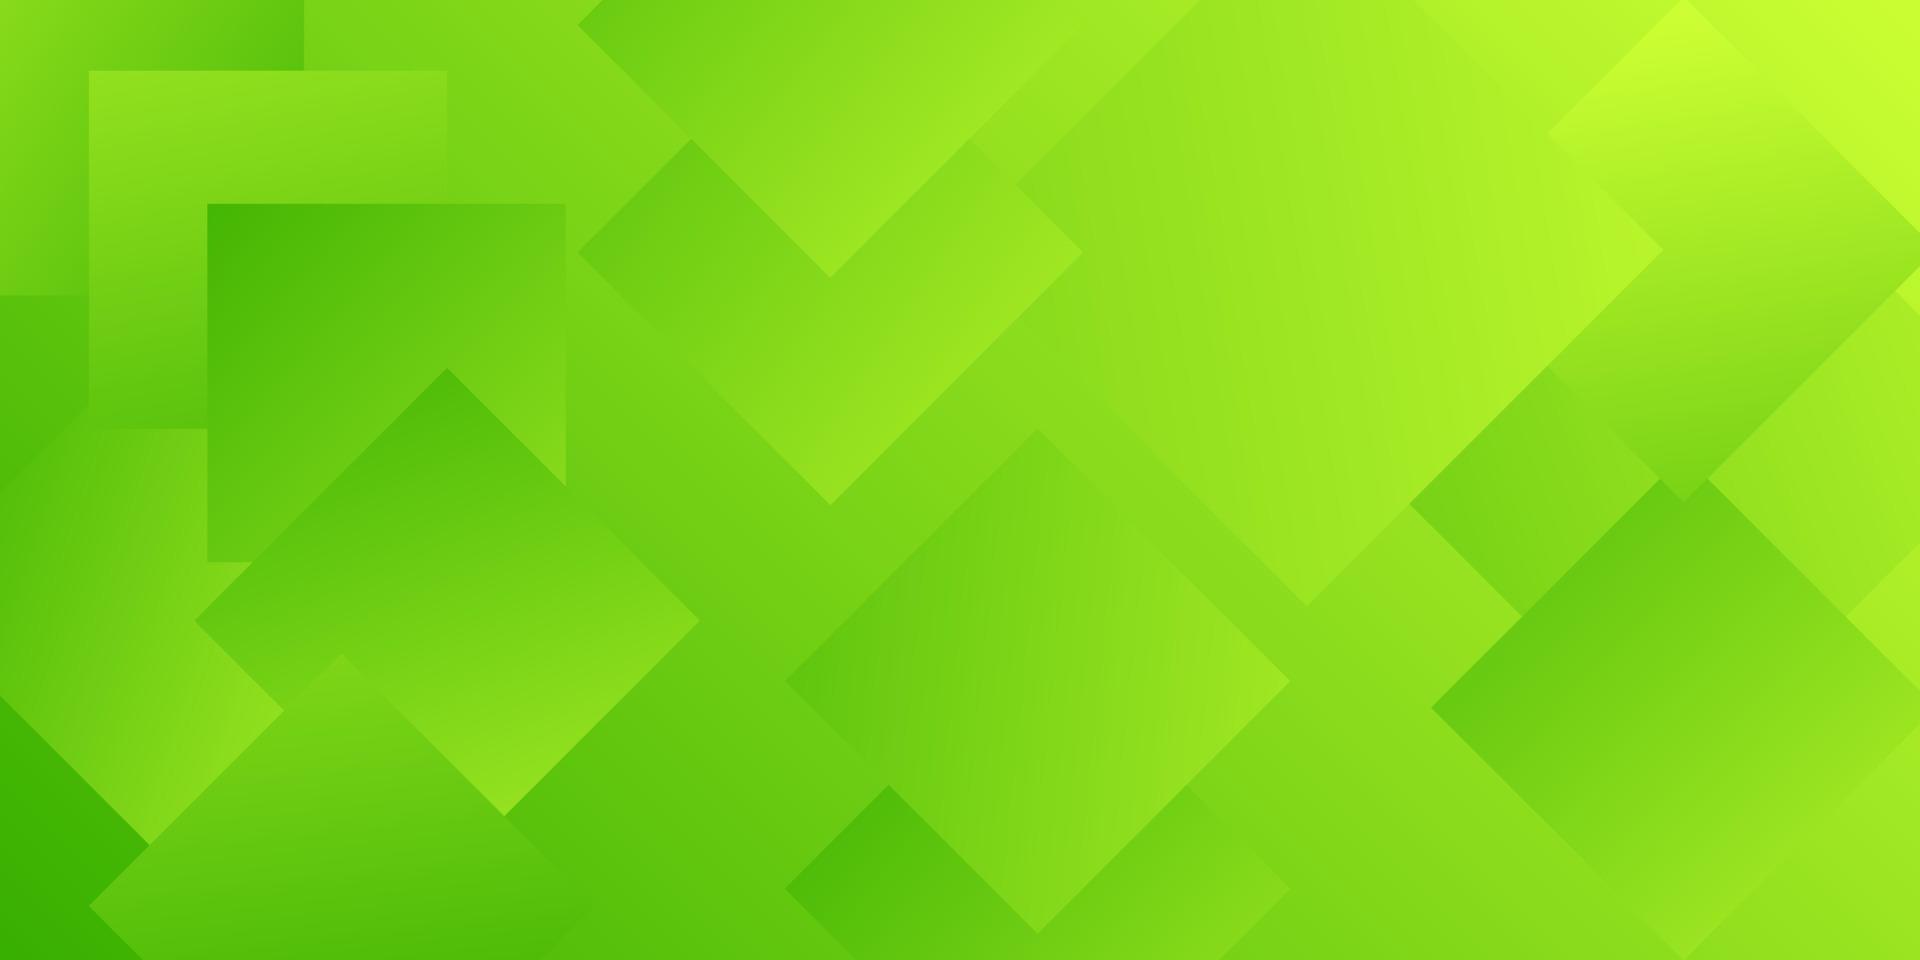 Abstract Green Geometric Banner Background vector